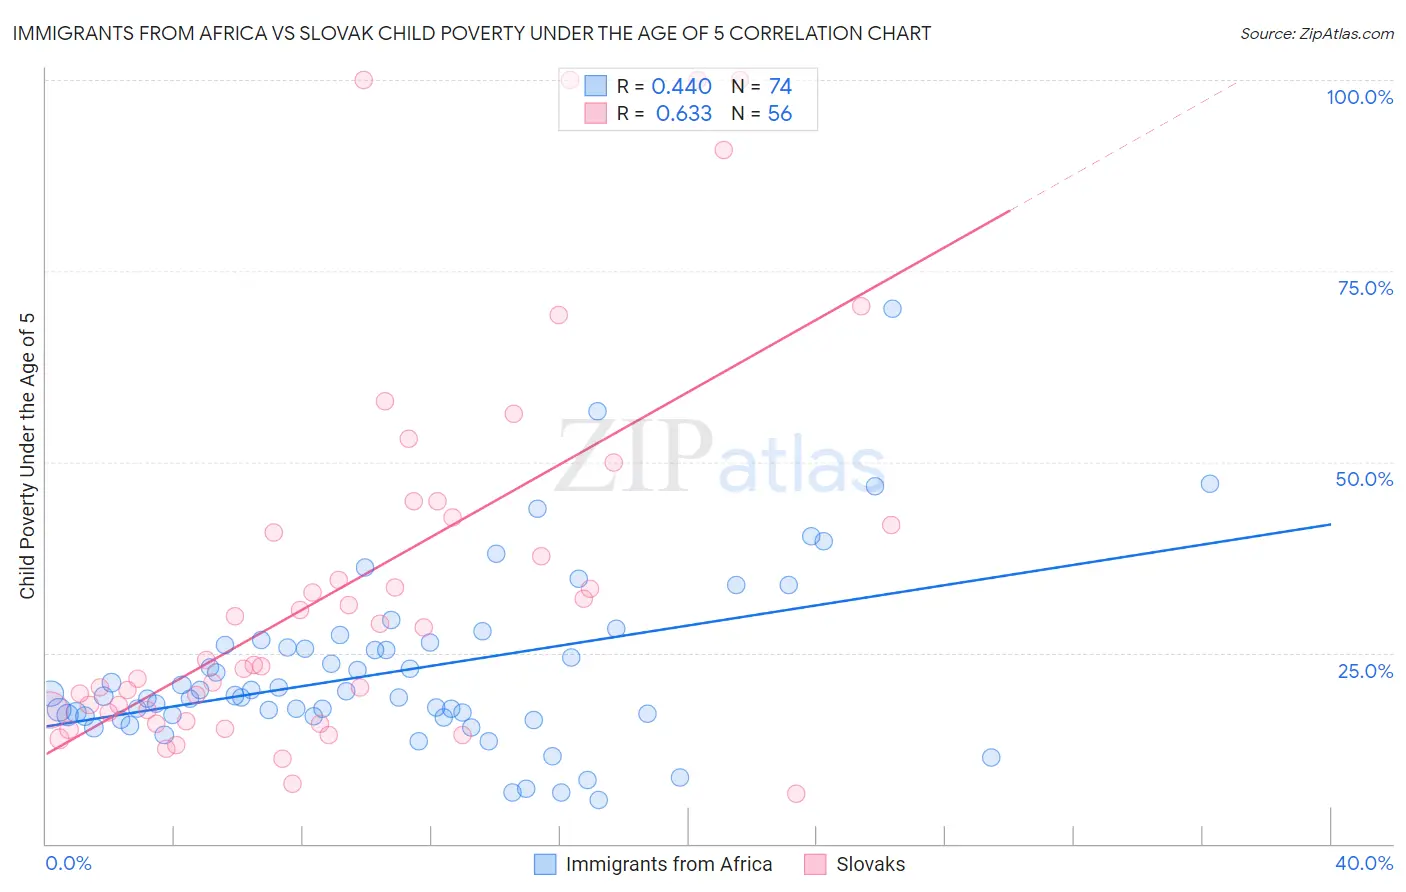 Immigrants from Africa vs Slovak Child Poverty Under the Age of 5